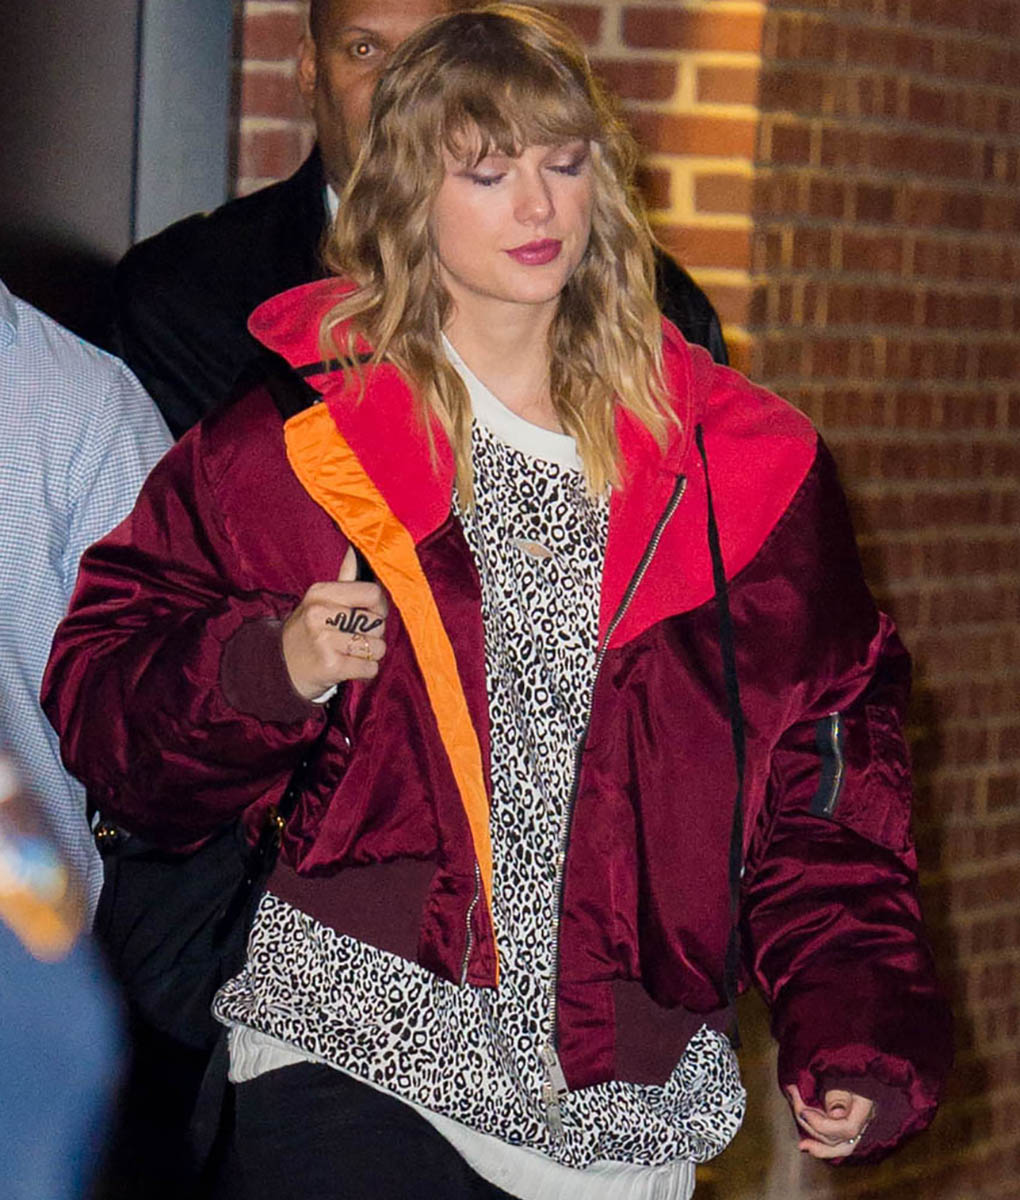 Taylor Swift spotted leaving her album release after party for Reputation in New York